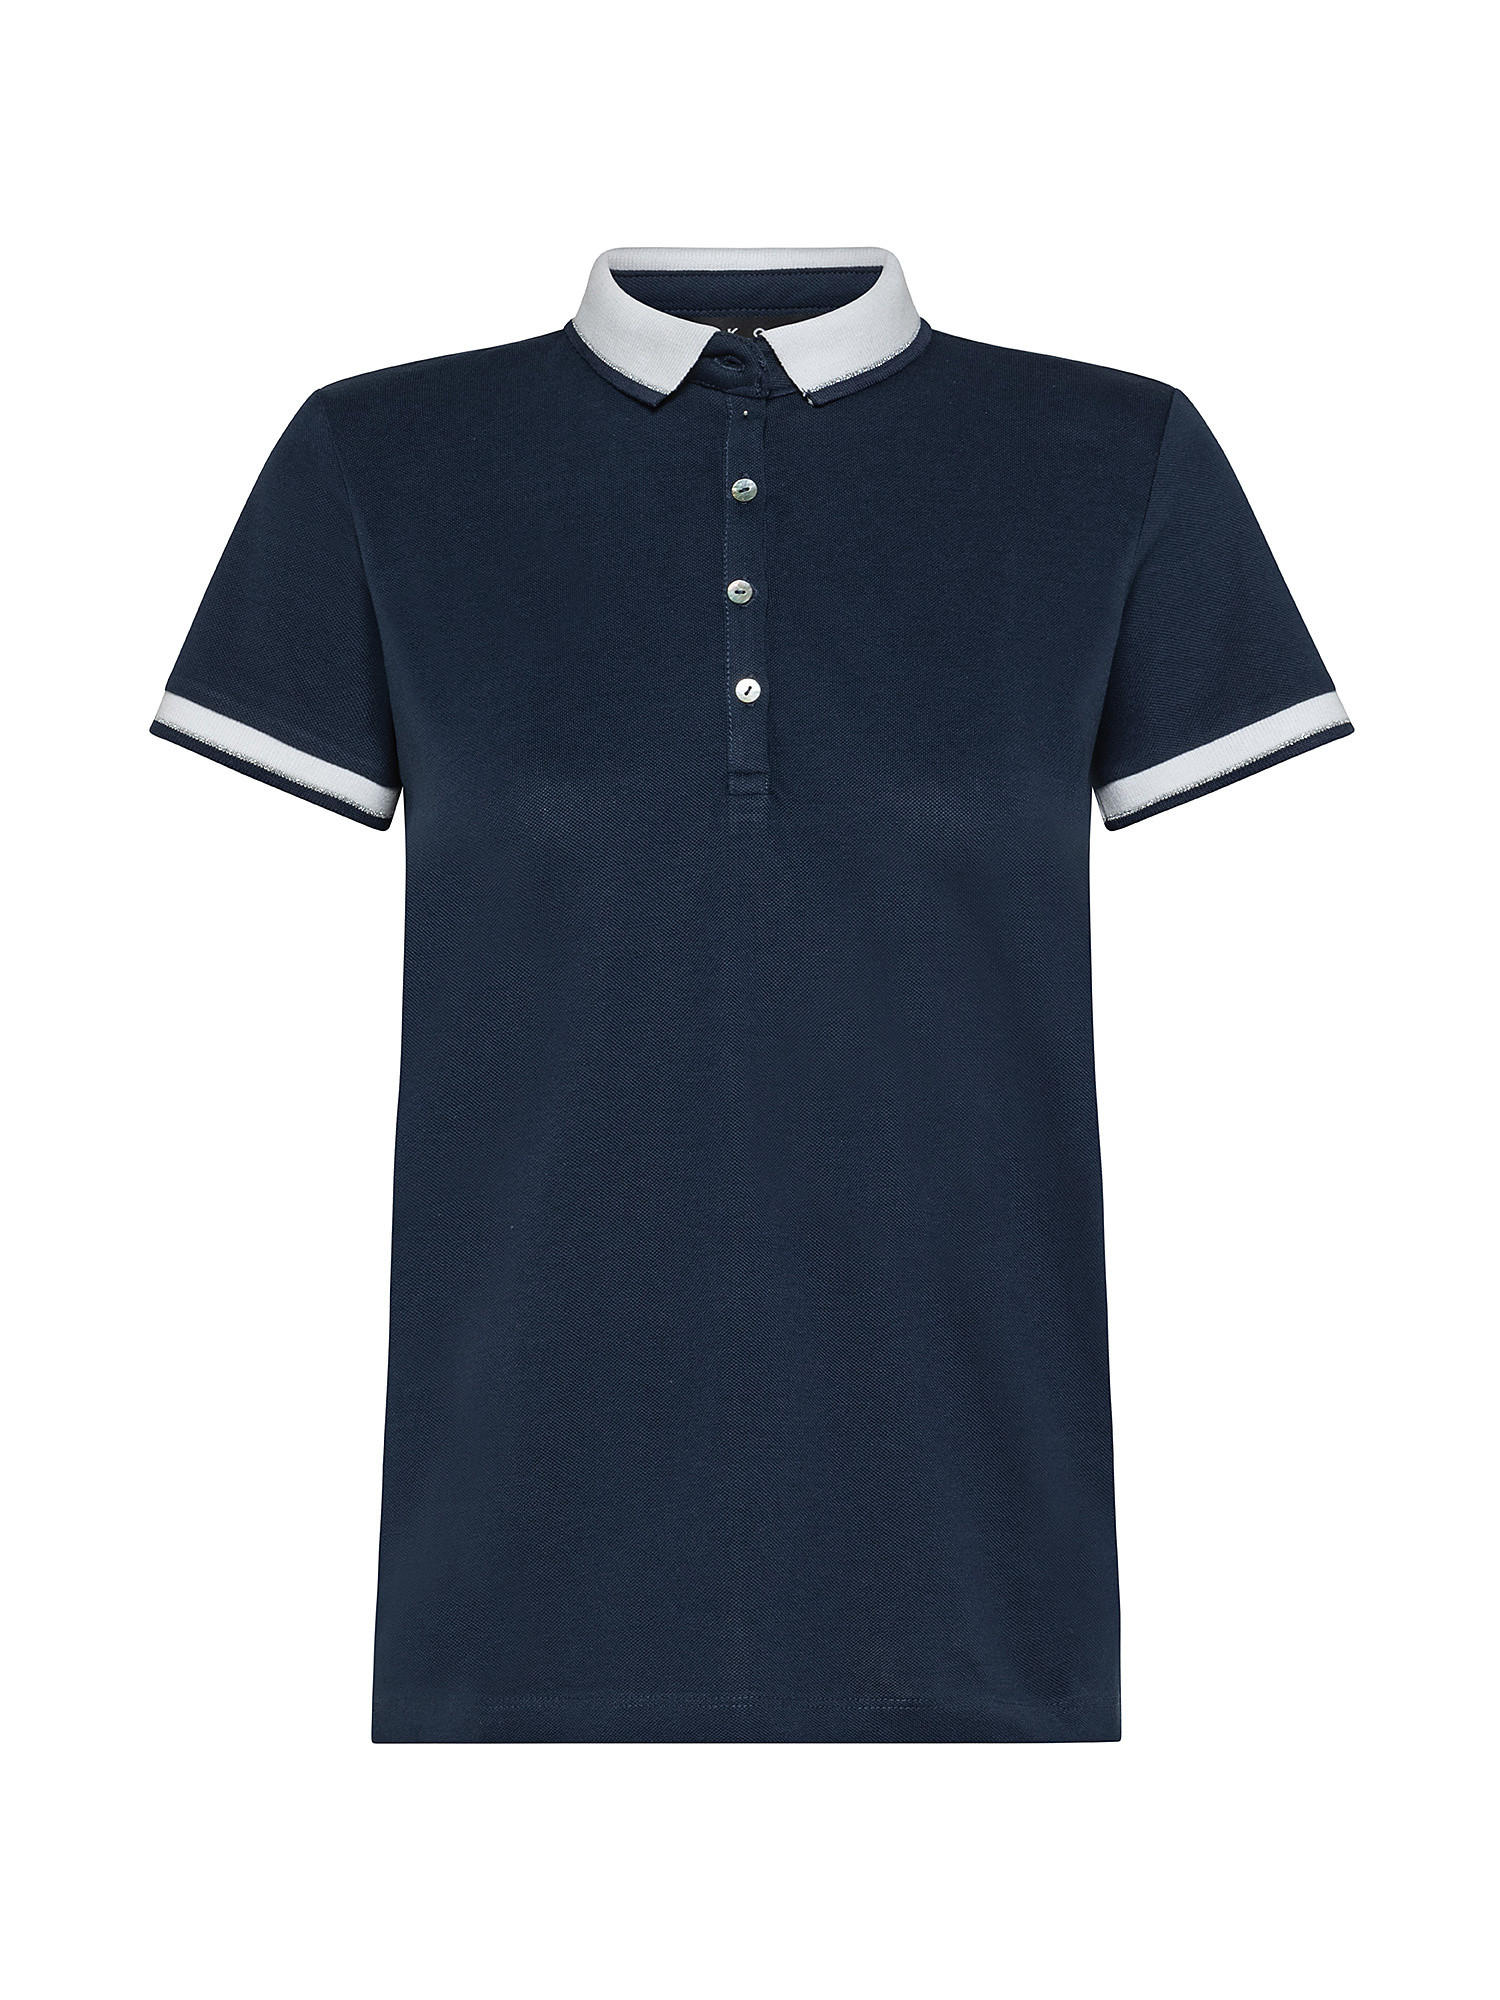 Polo shirt with lurex details, Blue, large image number 0